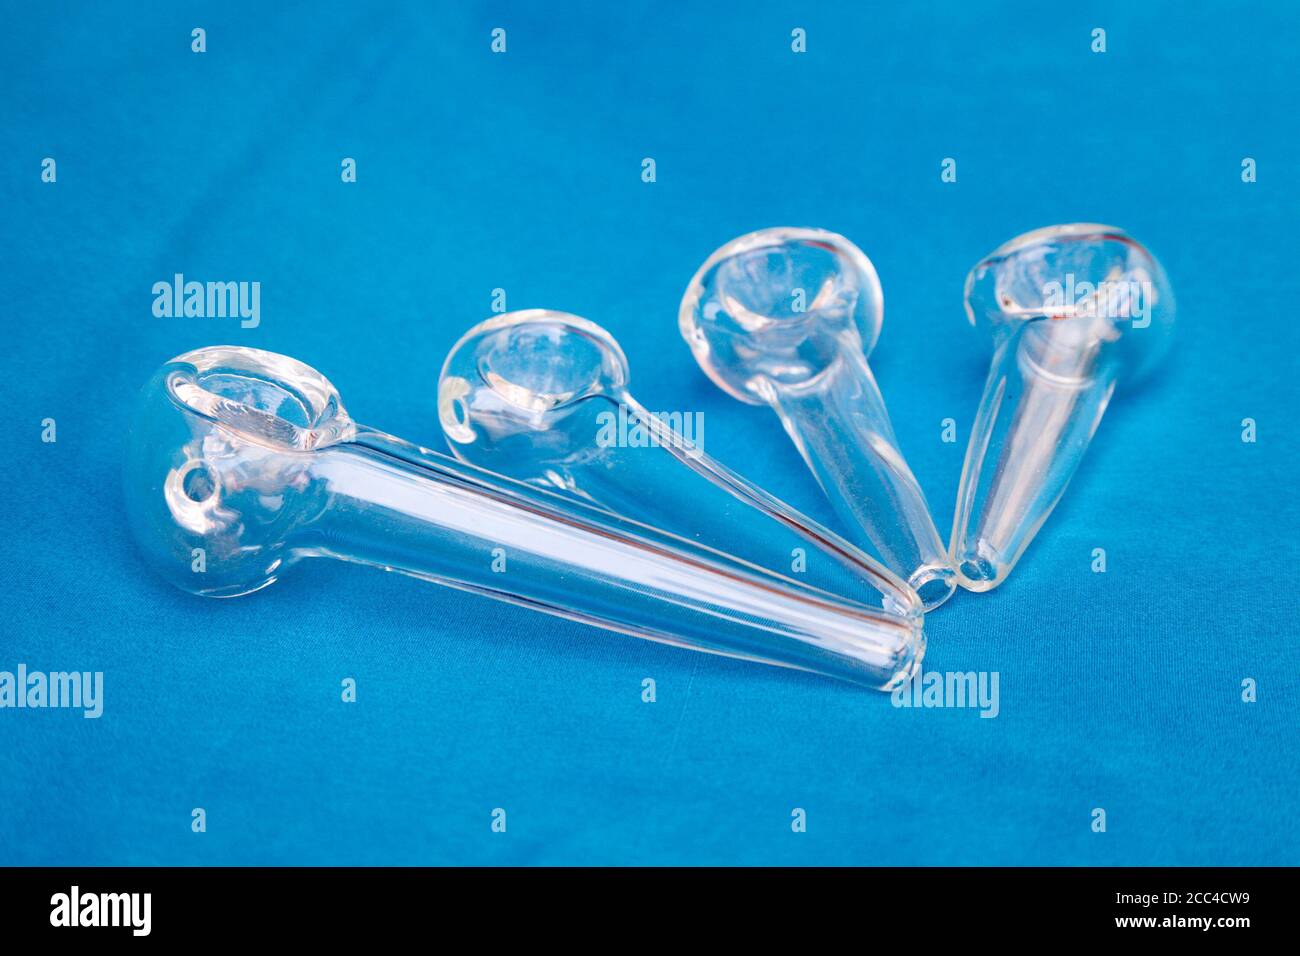 Glass pipe or bong for marijuana smoking on a blue fabric background Stock Photo